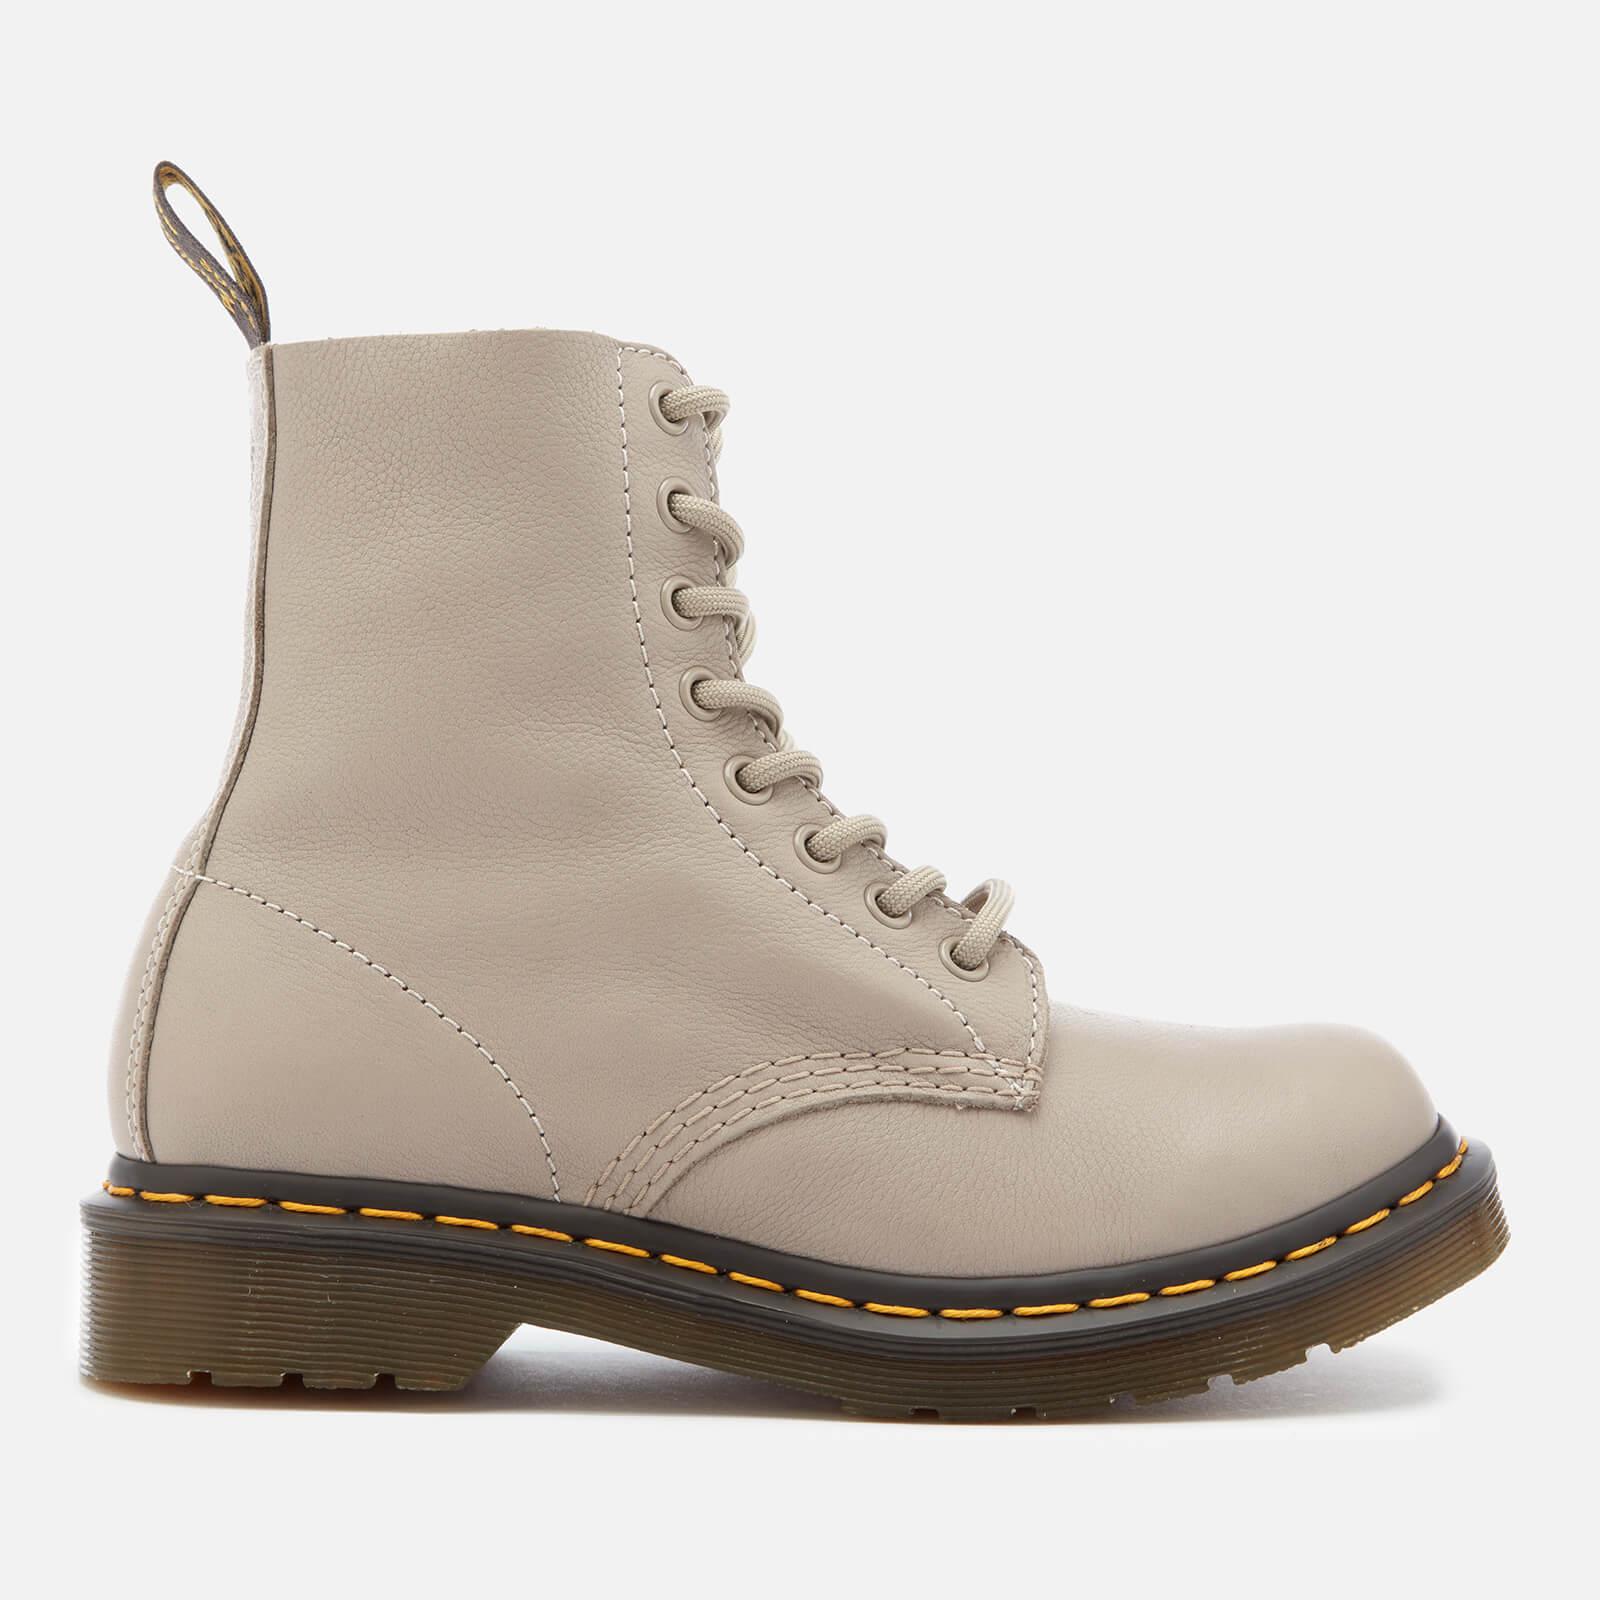 Dr. Martens 1460 Virginia Leather Pascal 8-eye Boots in Grey (Gray) - Lyst